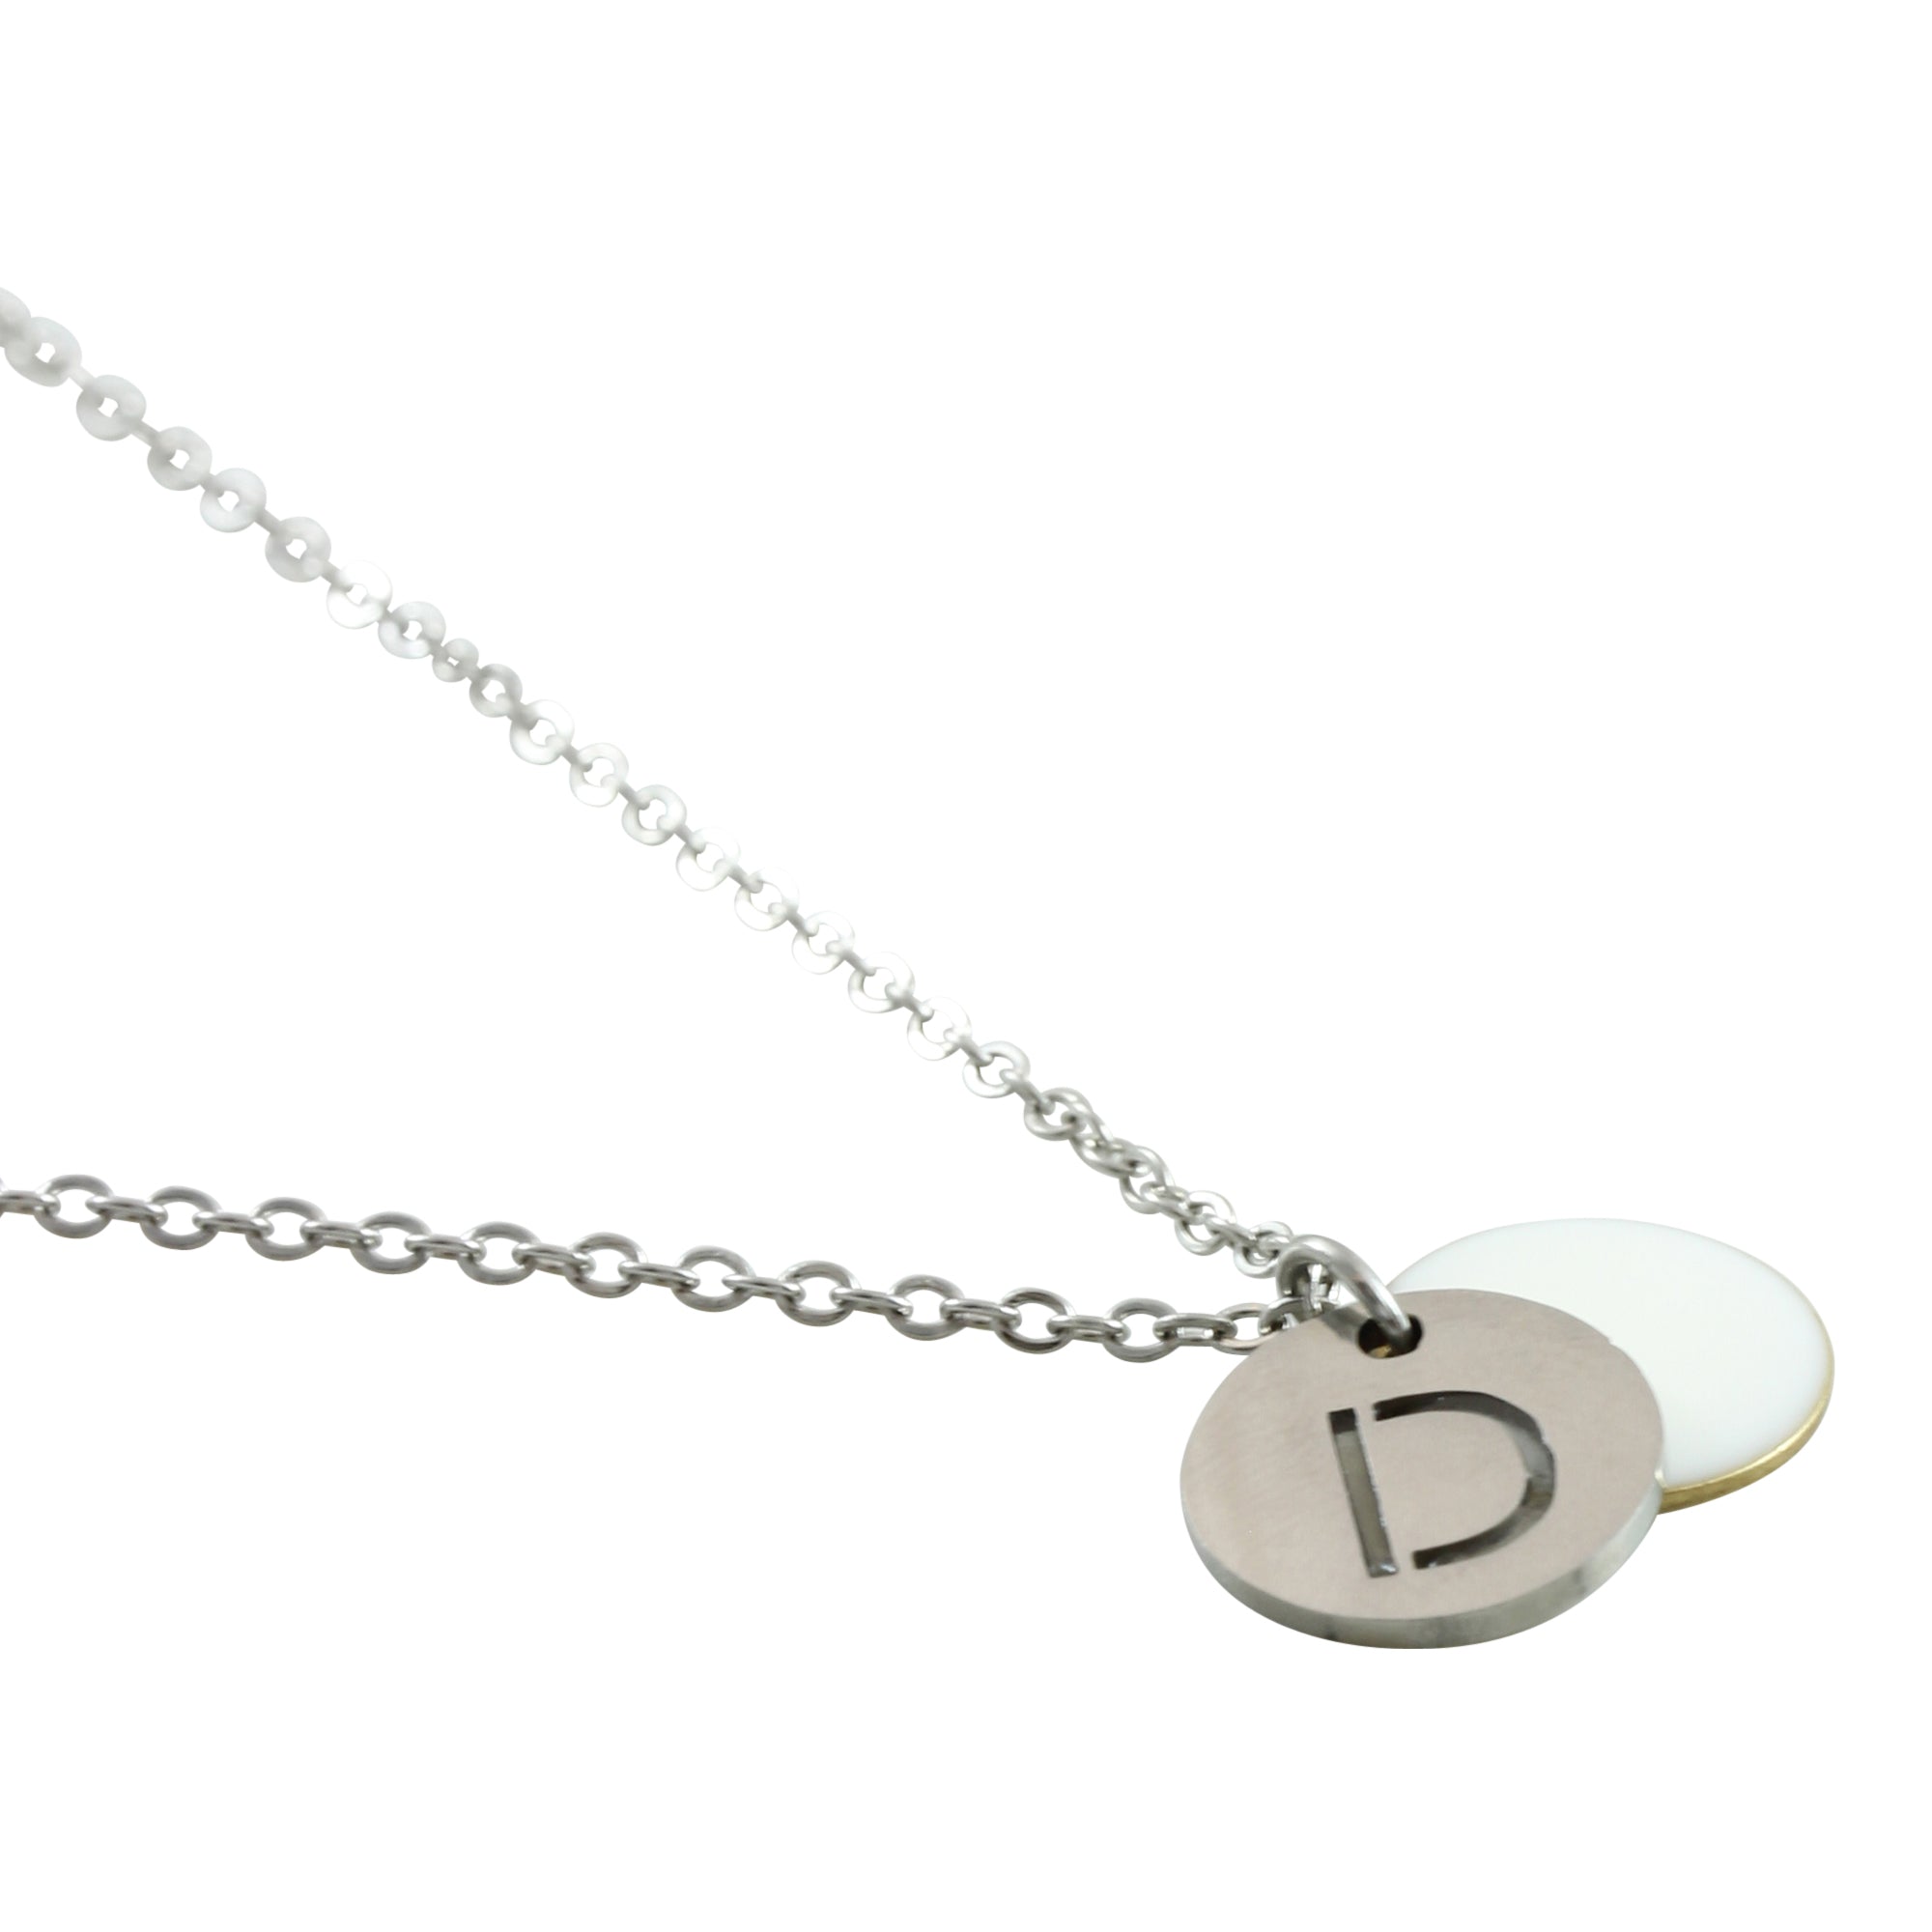 "Le Délice" Waterproof "Imperméable” Personalized Initial Necklace with White Enamel Charm